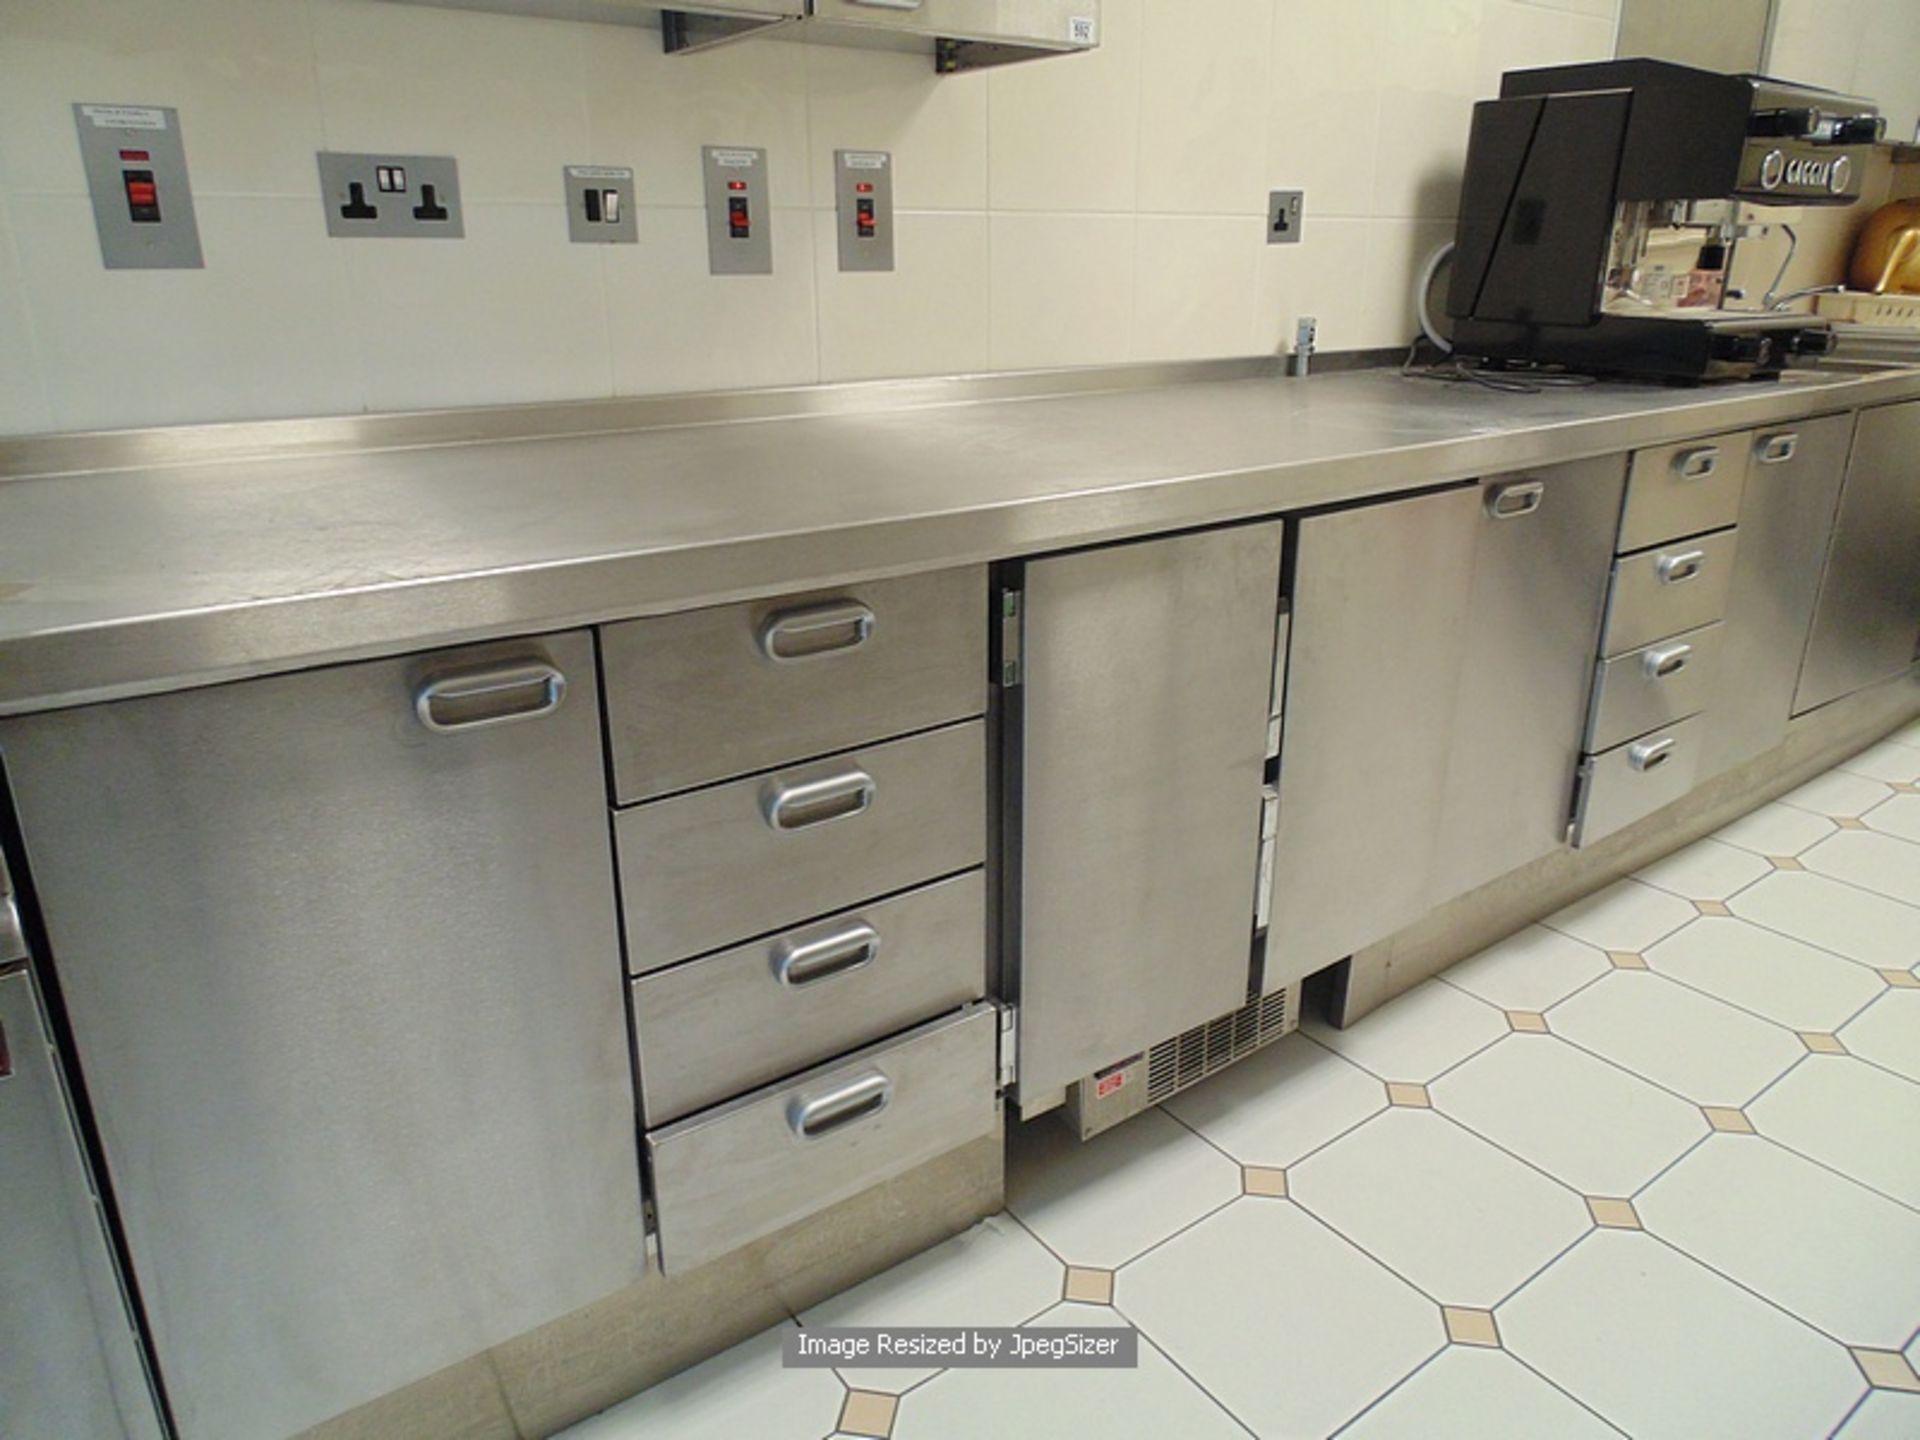 Moffat stainless steel workstation comprising of 3 x single door cupbards, 2 x 4 drawer storage - Image 2 of 4